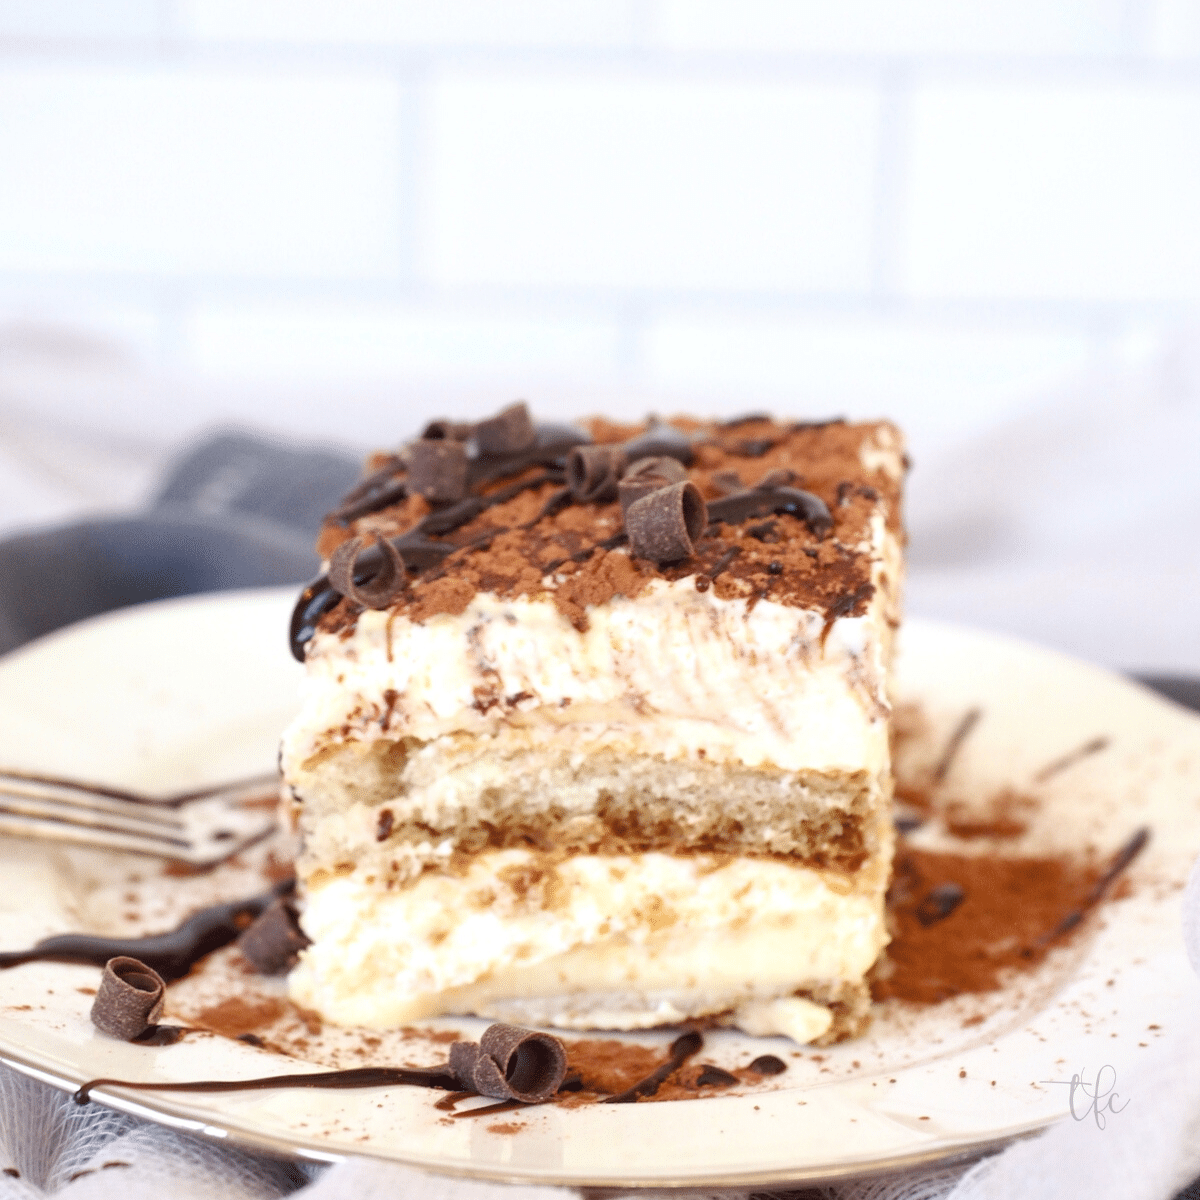 Tiramisu slice on a plate sprinkled with cocoa powder and a drizzle of chocolate sauce.